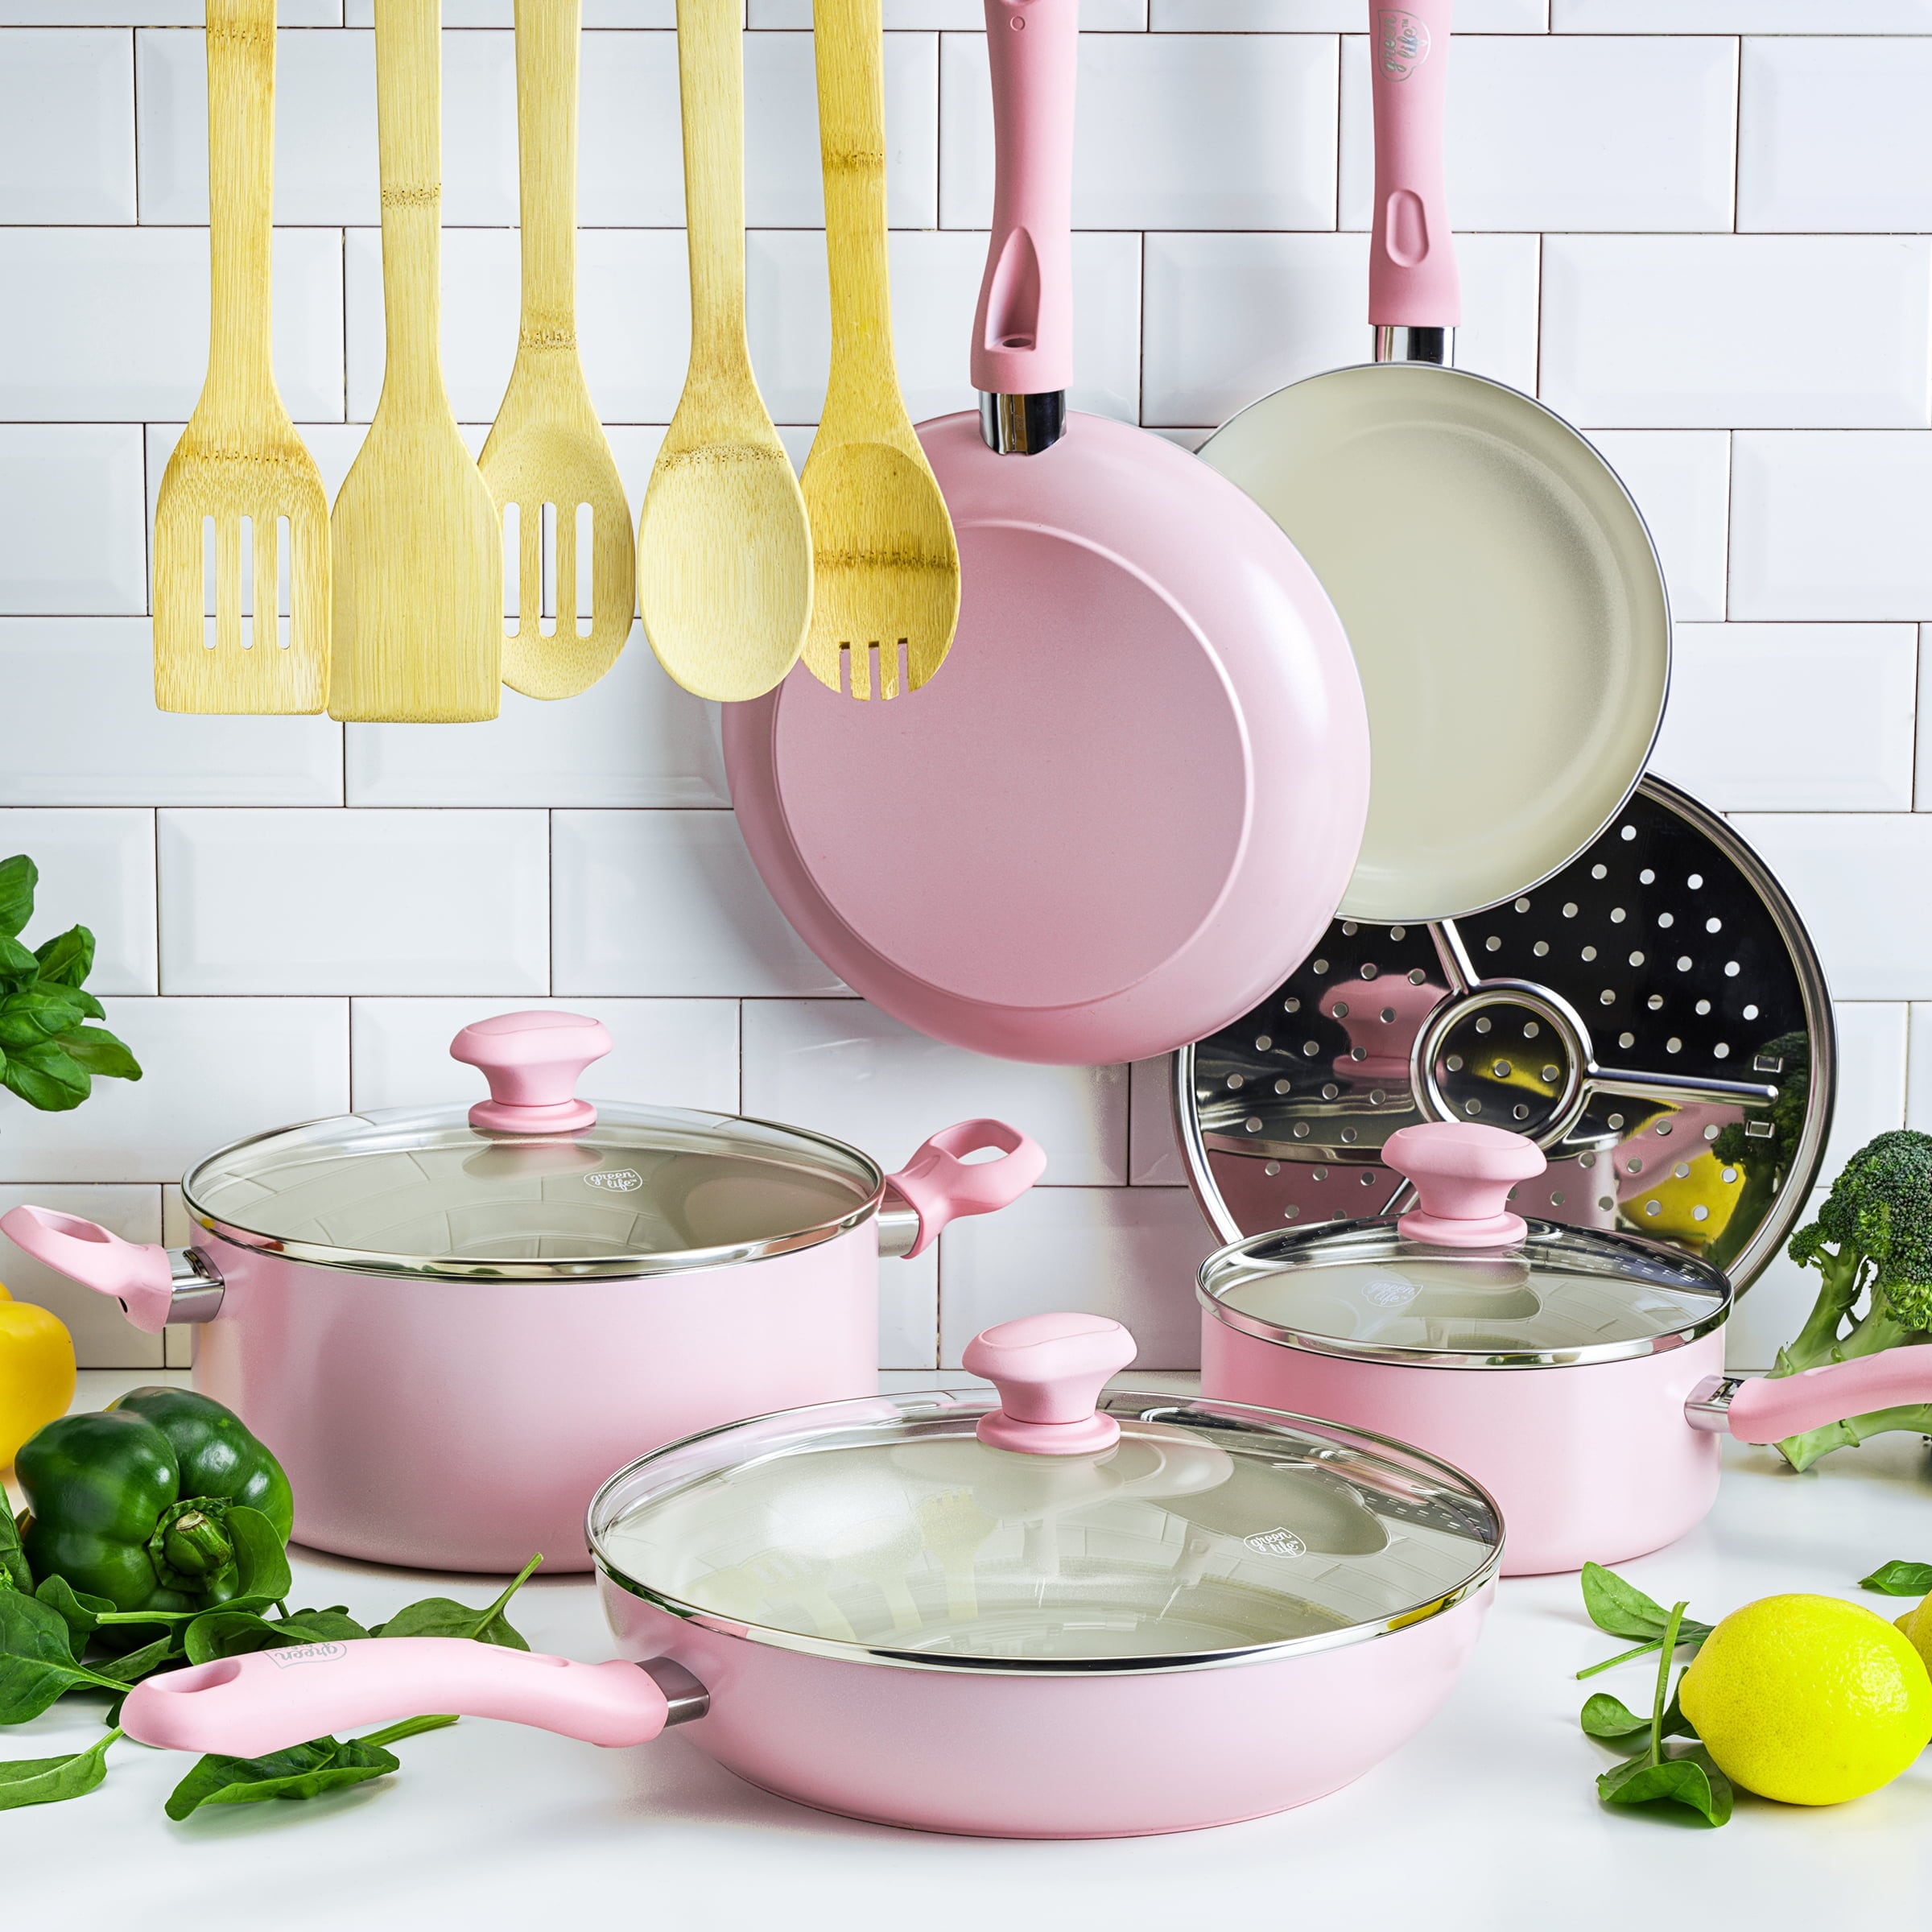 https://ak1.ostkcdn.com/images/products/is/images/direct/7cadfc0e13207eead69ca46218674f288df9c8ec/Soft-Grip-Diamond-Healthy-Ceramic-Nonstick%2C-Cookware-Pots-and-Pans-Set%2C-14-Piece%2C-Turquoise%2C-Dishwasher-Safe.jpg